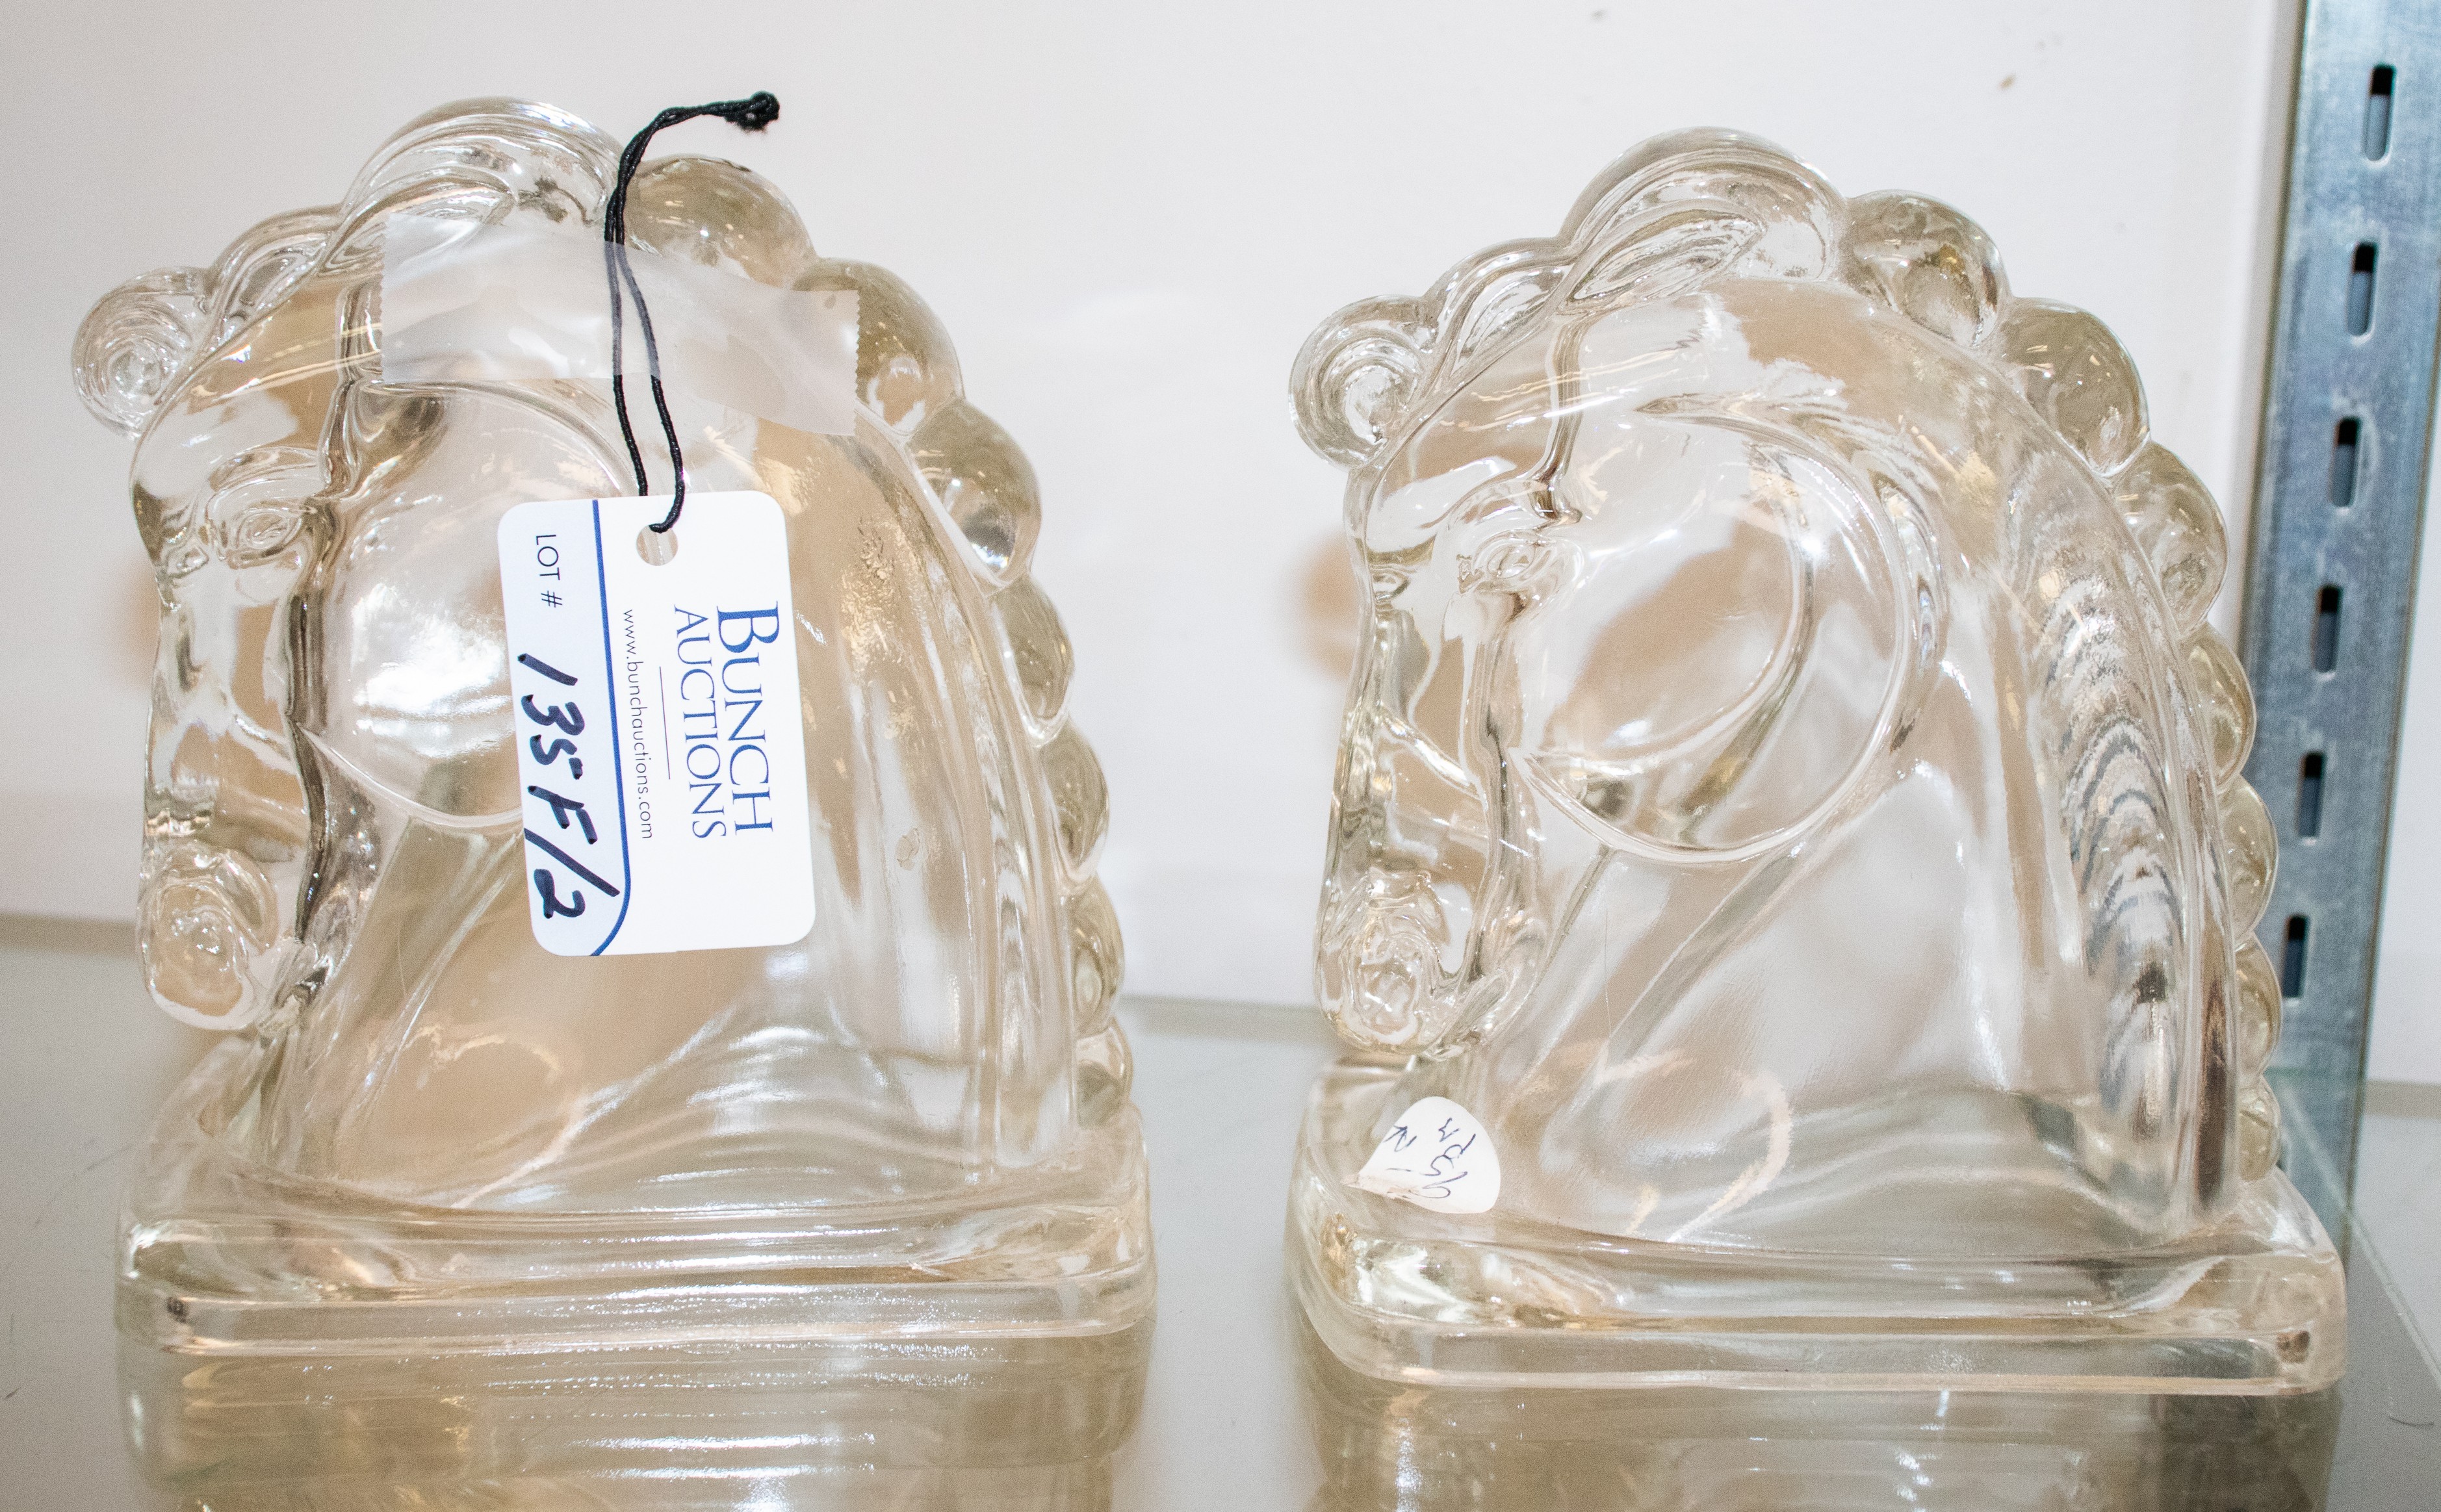 Pair of glass horse head bookends, 5-1/2